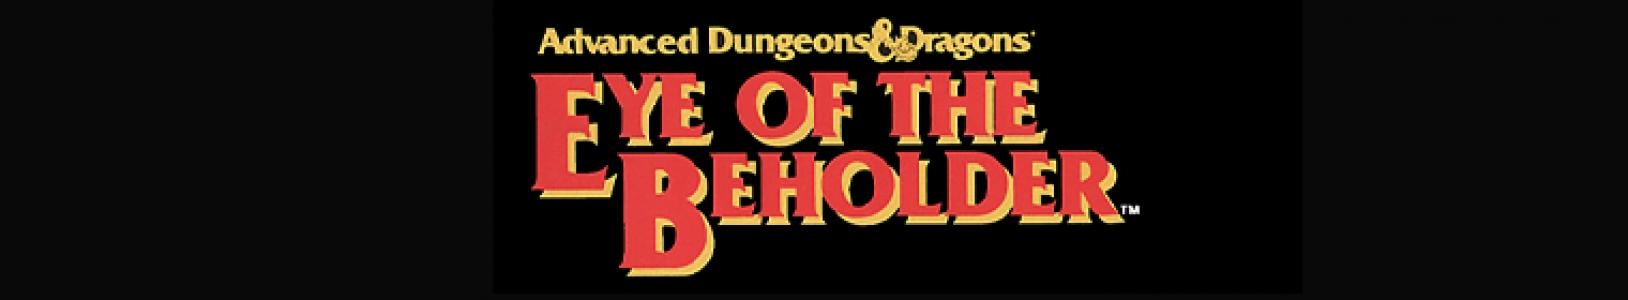 Advanced Dungeons & Dragons: Eye of the Beholder banner